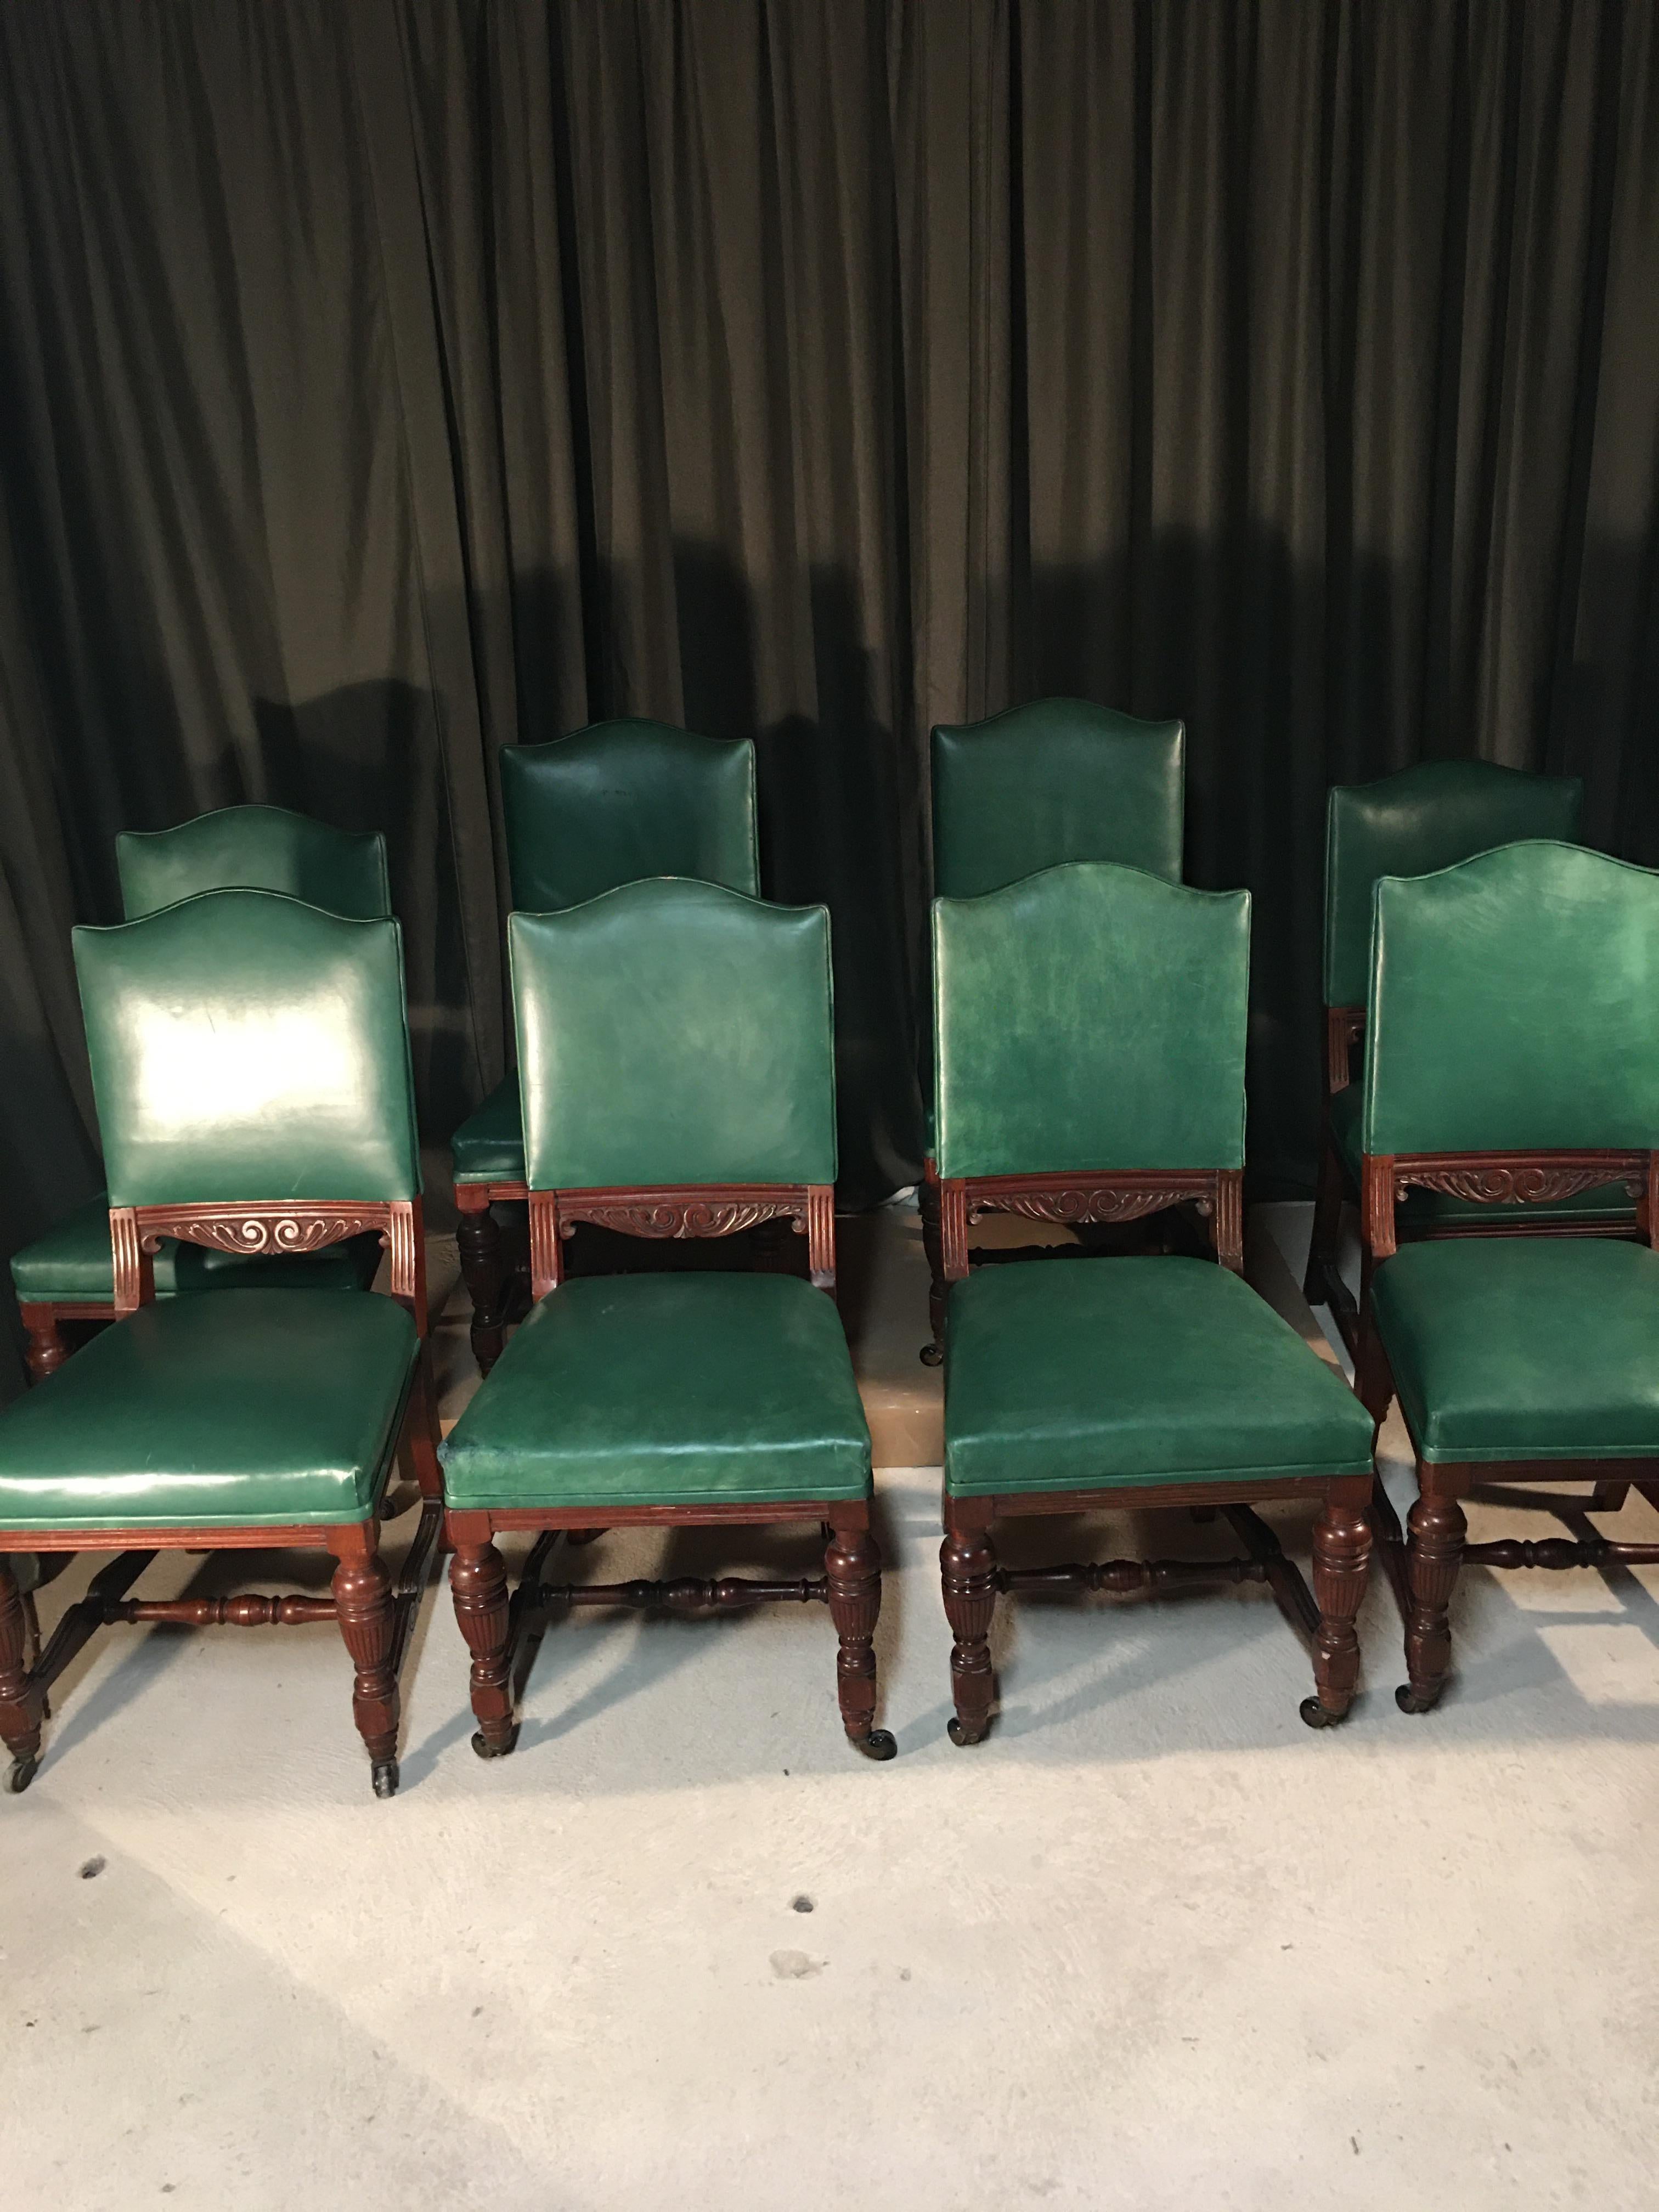 Series of 8 English chairs, made around 1910, chair with high back in carved solid mahogany, green leather upholstery.